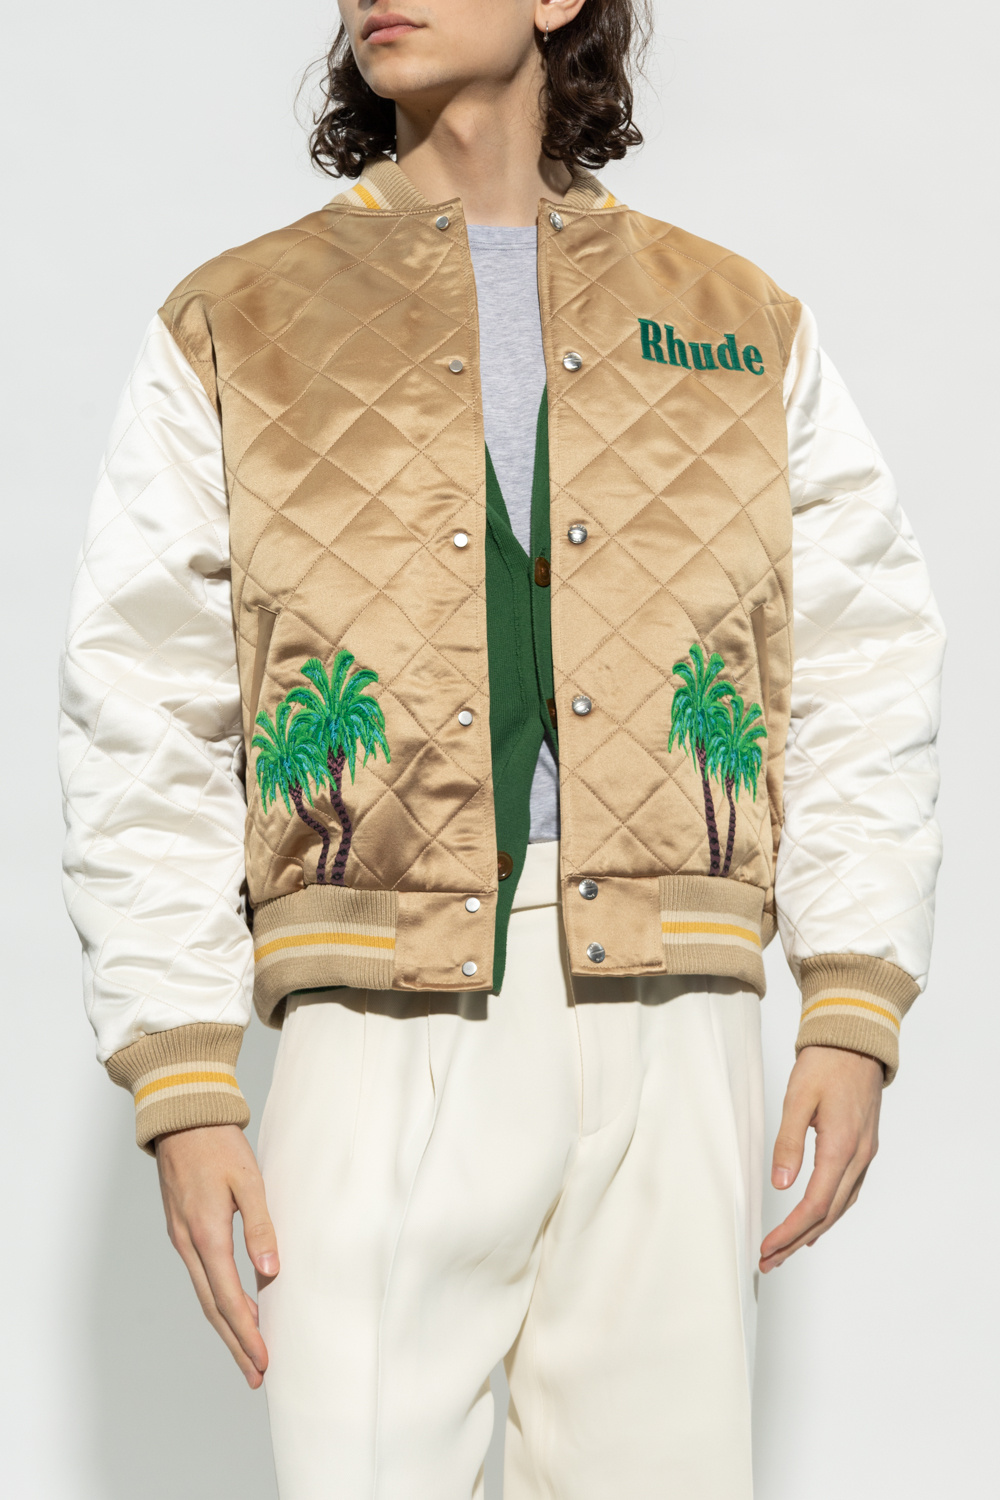 Rhude Quilted bomber jacket